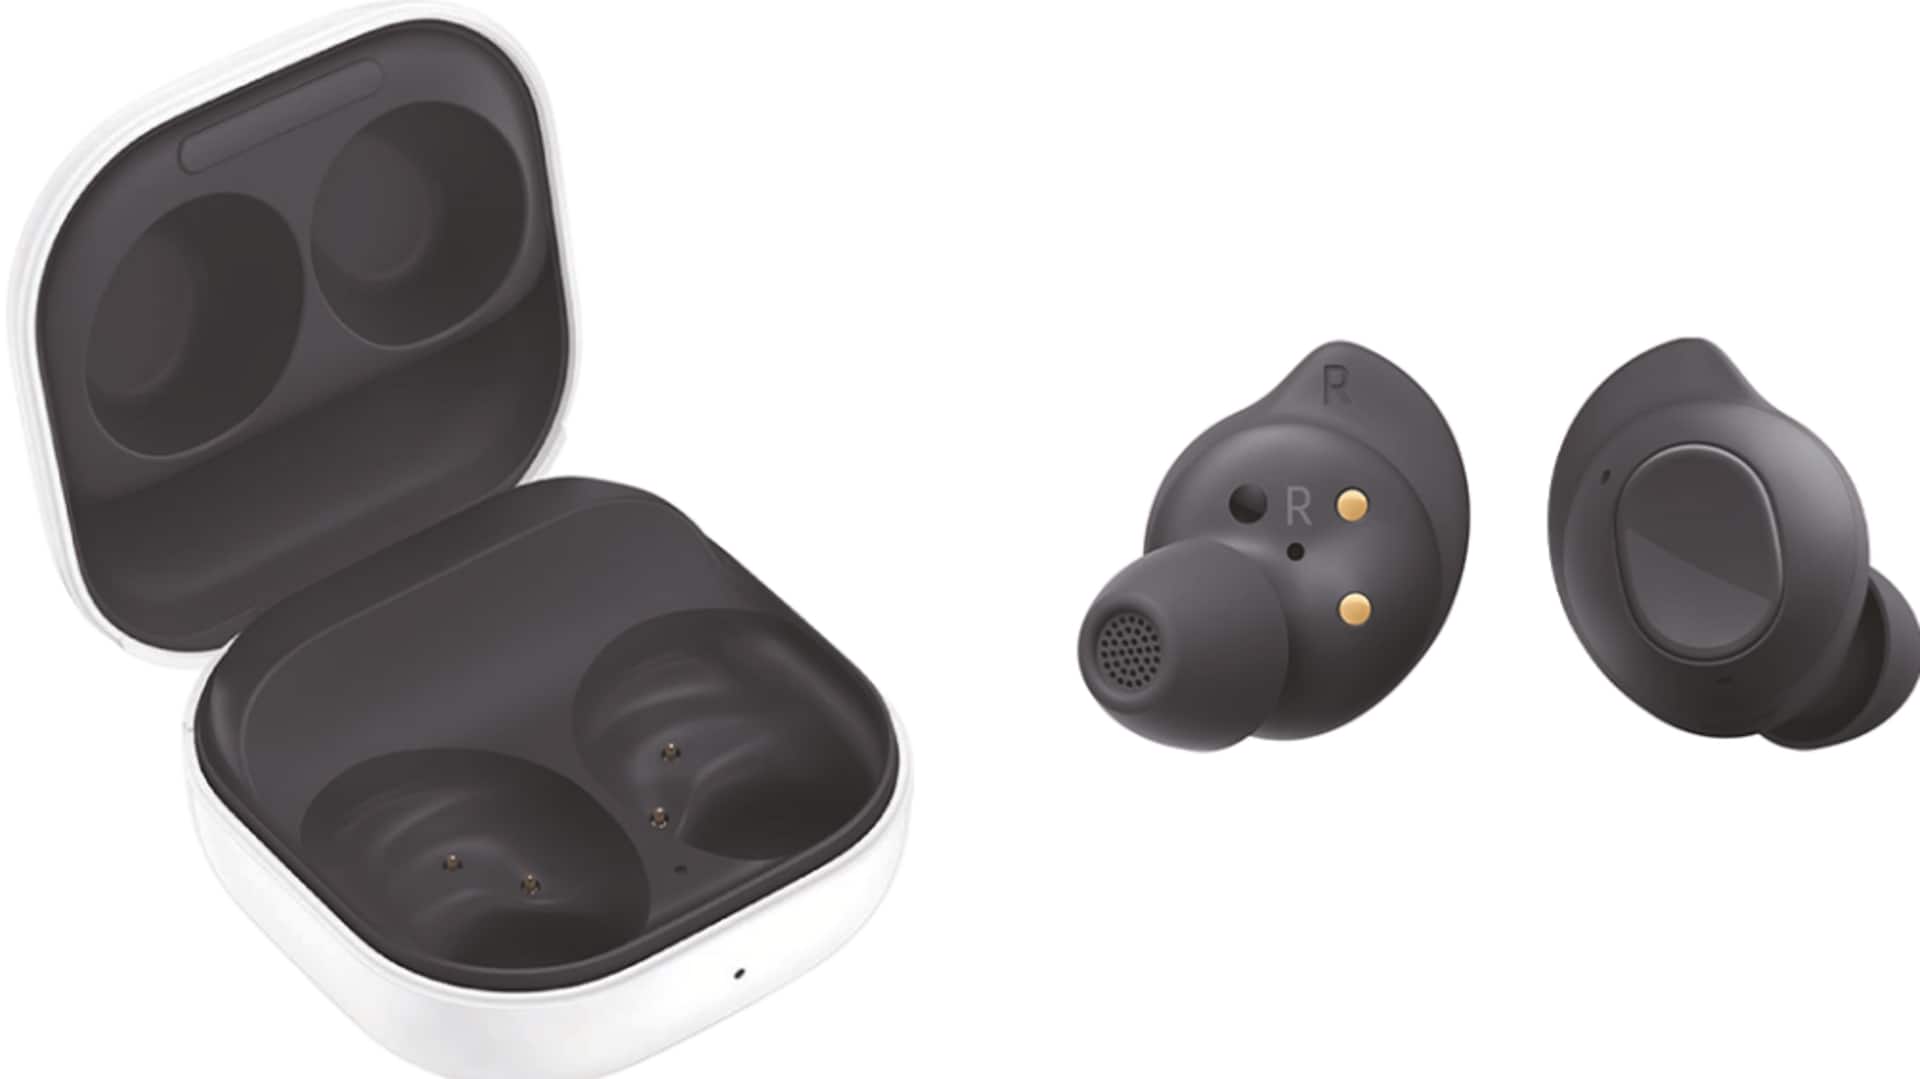 Samsung Galaxy Buds FE's renders confirm design and features